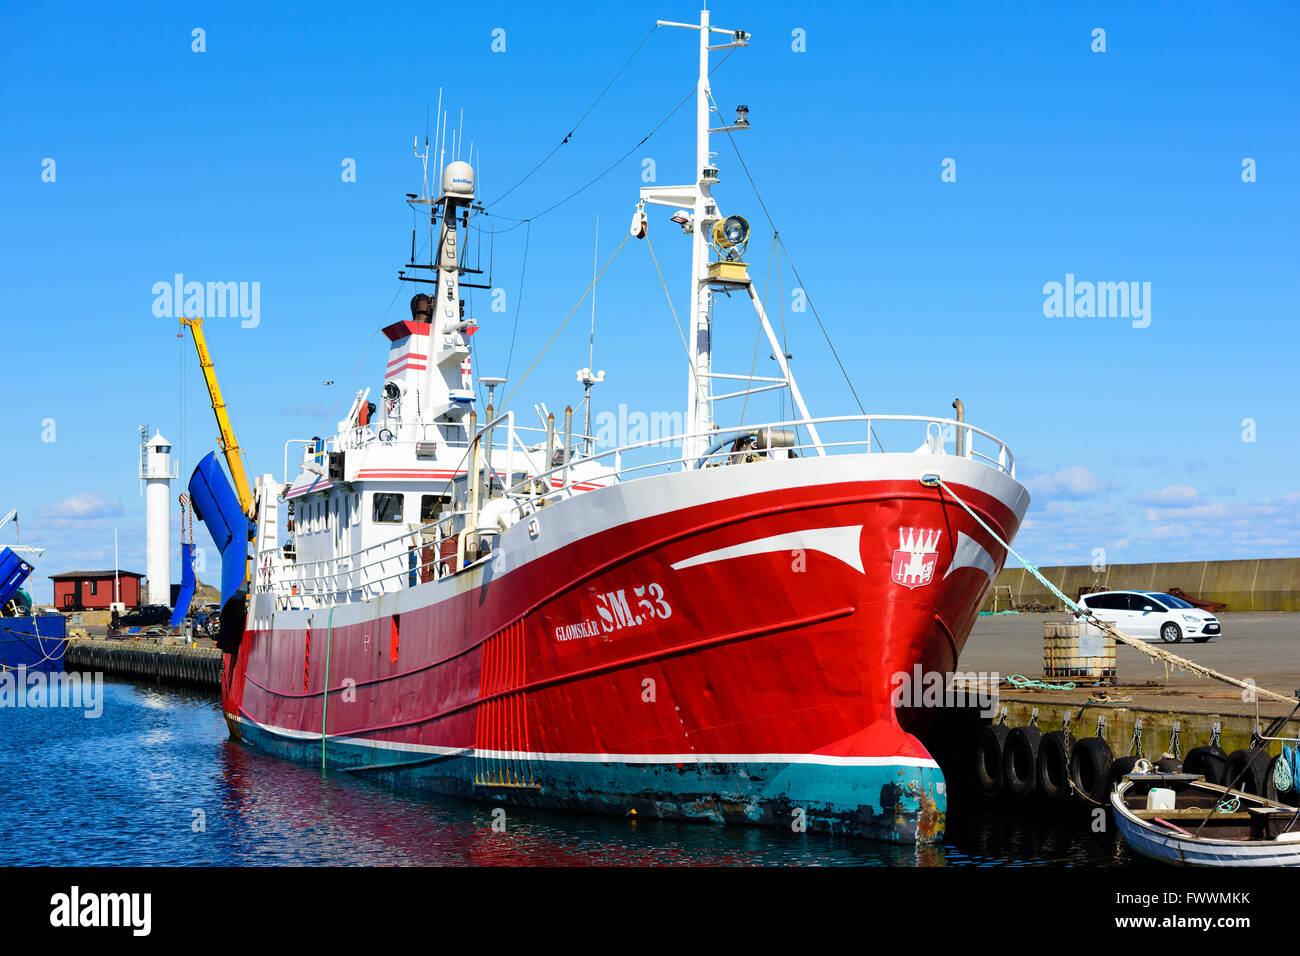 Simrishamn, Sweden - April 1, 2016: A red and white trawler fishing boat seen from the stern, moored at the docks one fine sprin Stock Photo